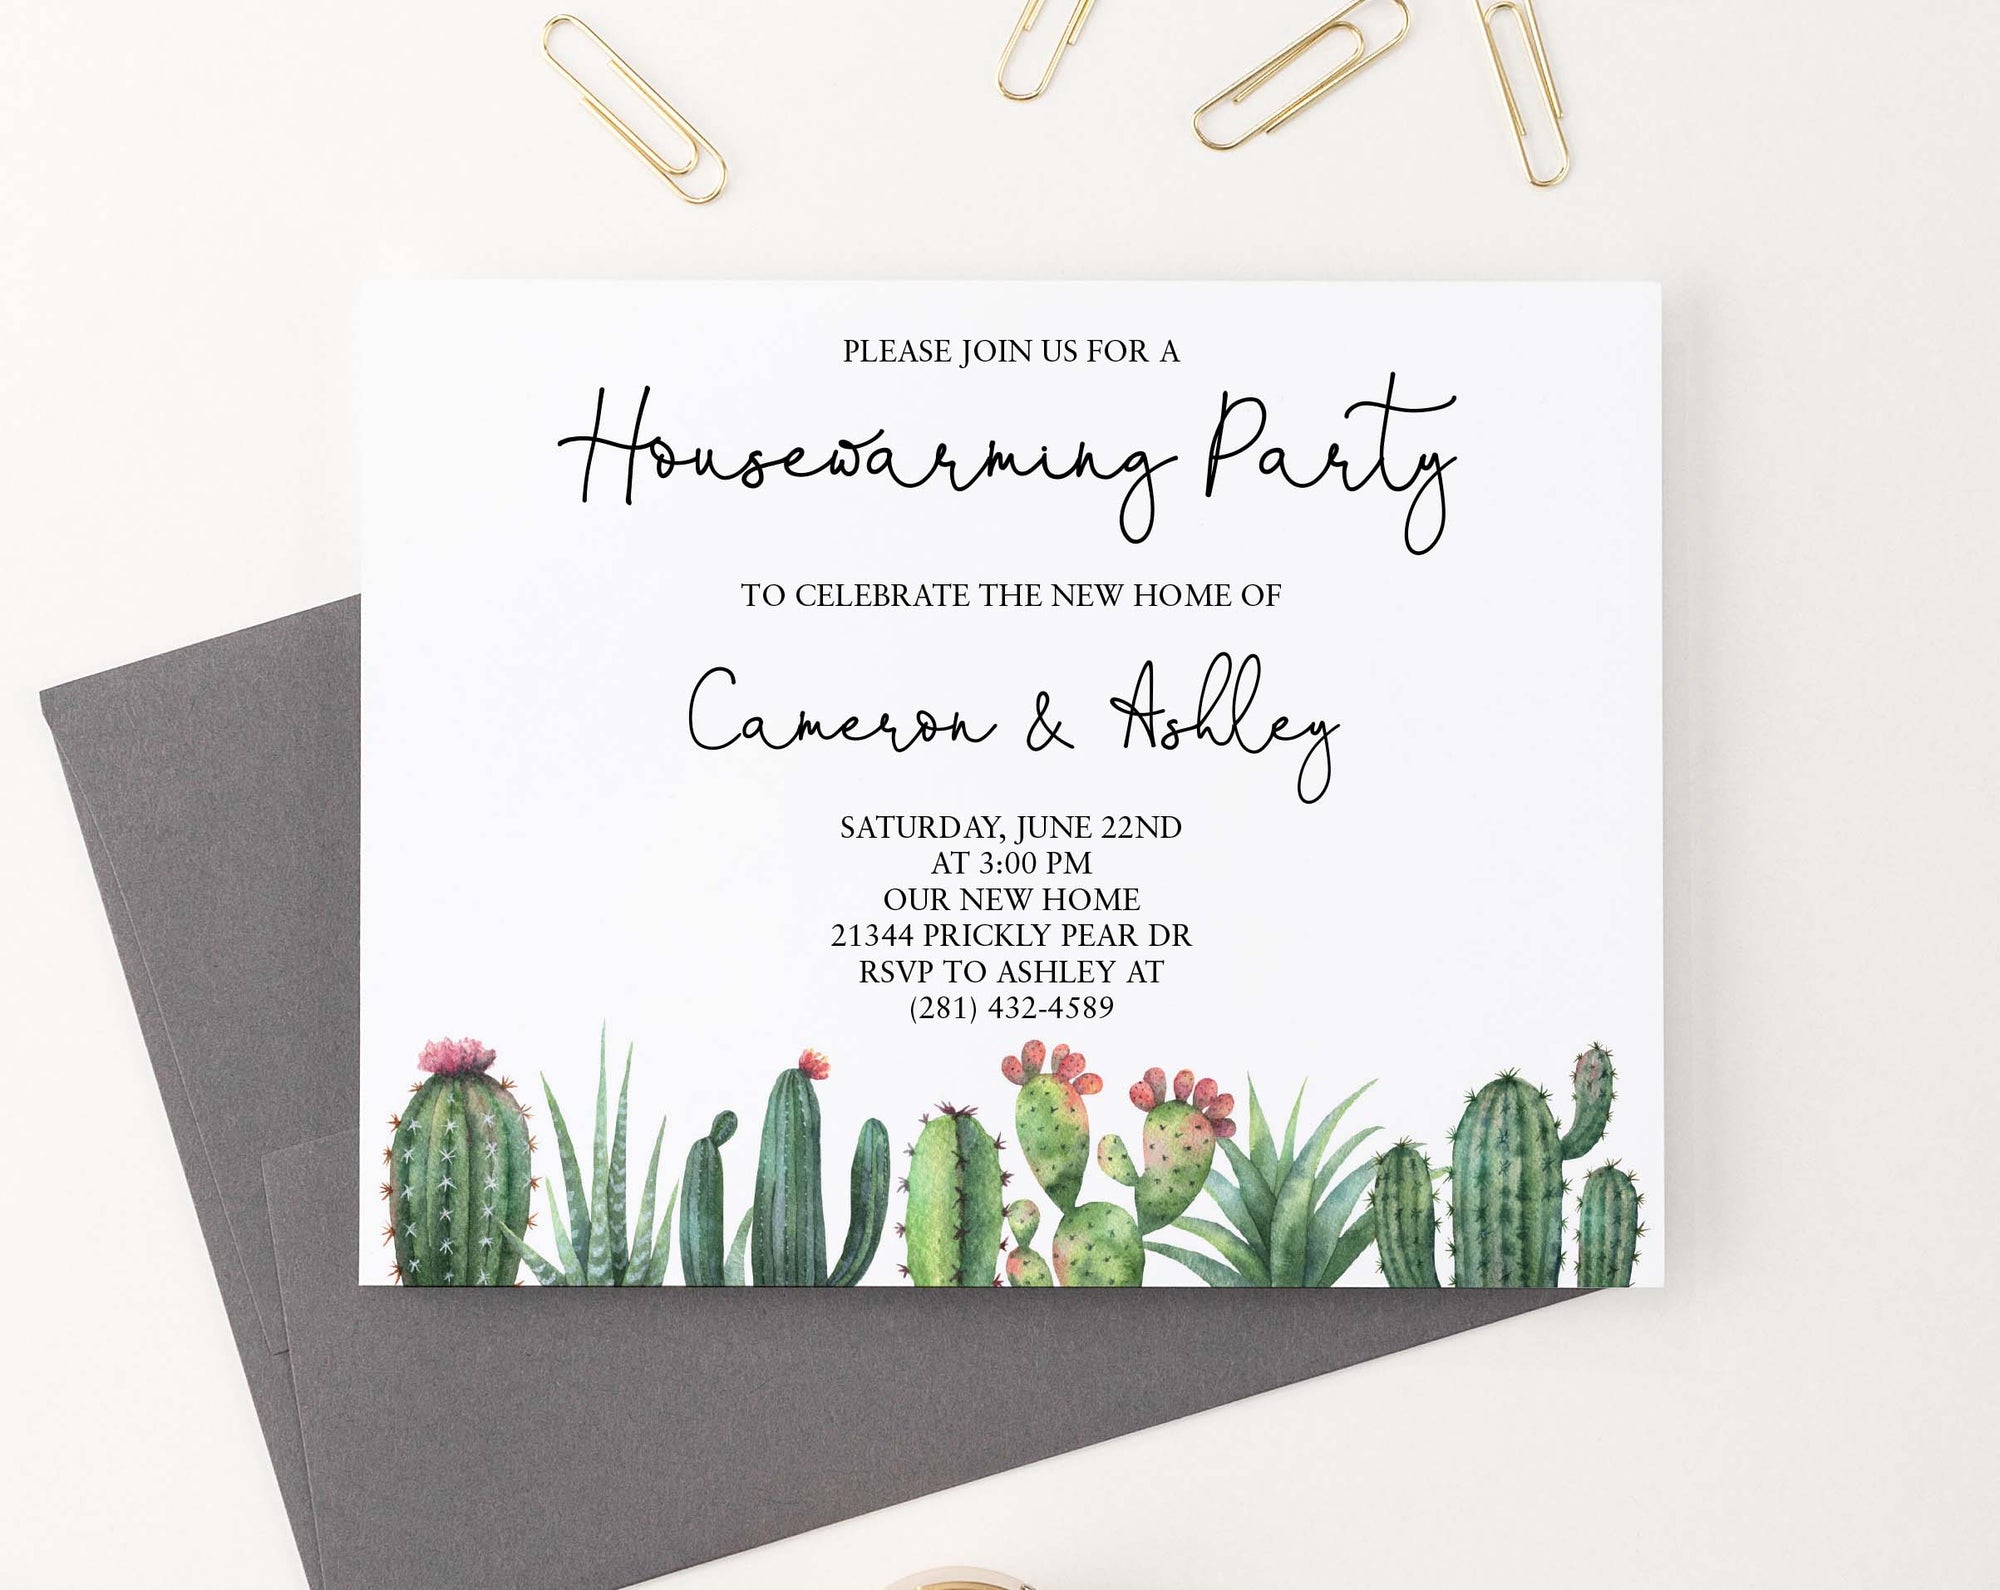 HPI017 personalized elegant housewarming party with cactus succulents greenery